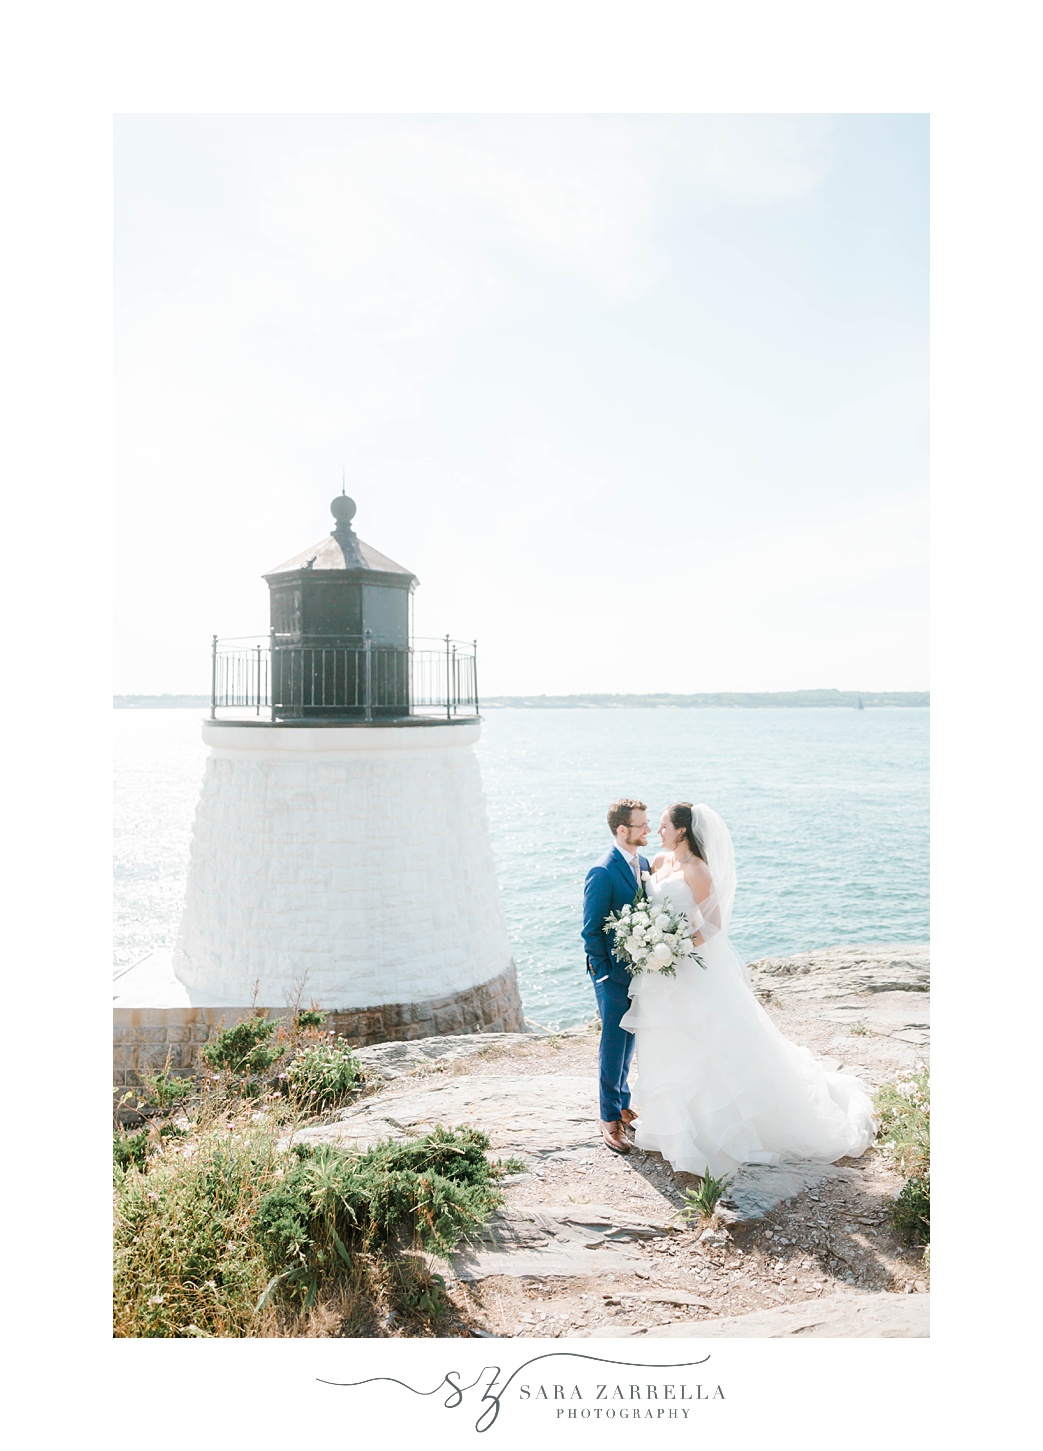 newlyweds stand together by lighthouse in Rhode Island 